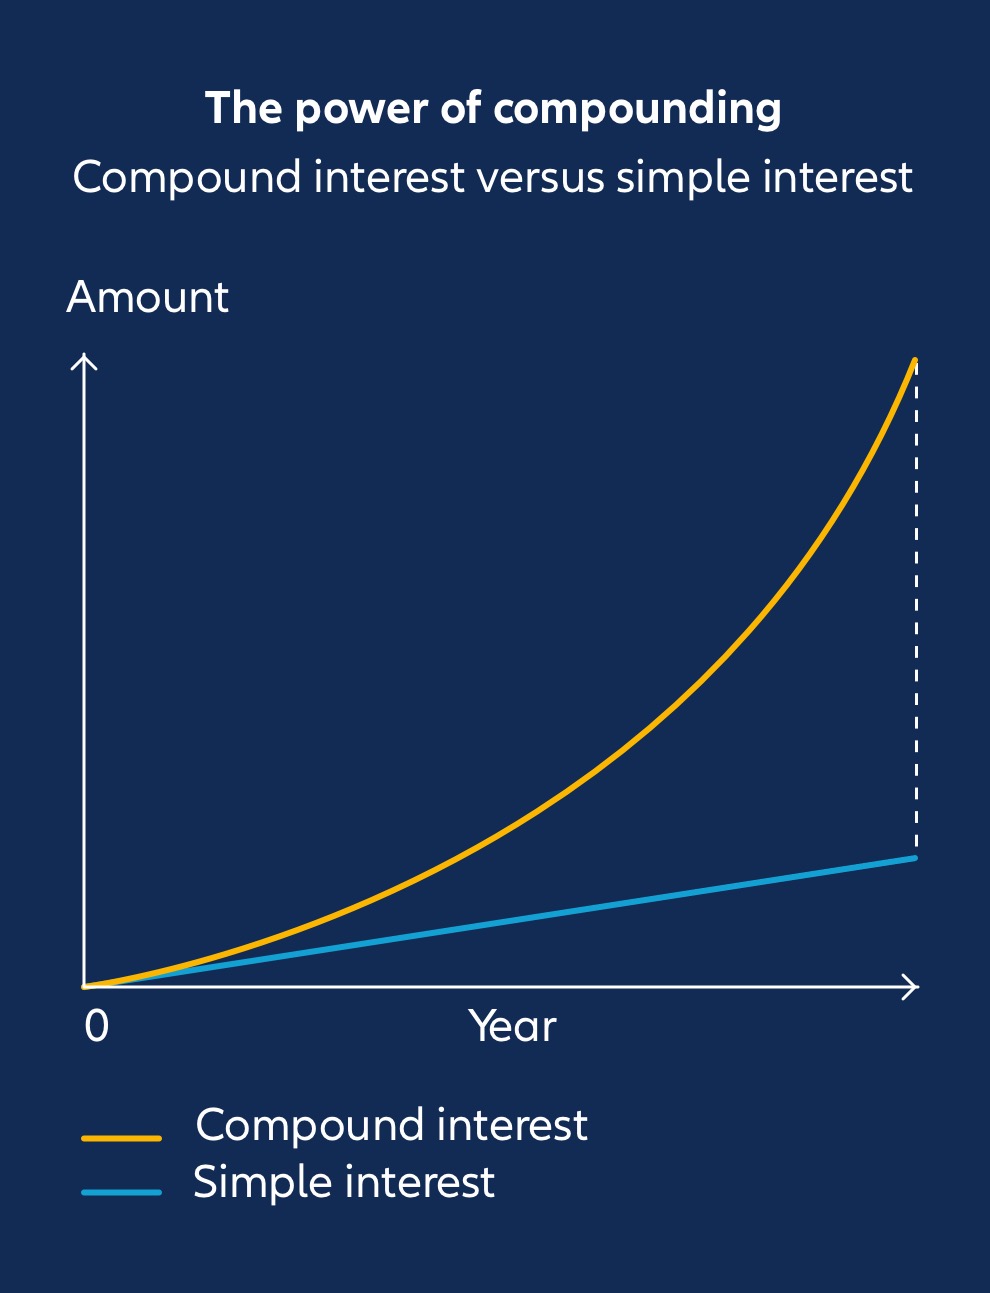 Infographic The power of compound interest, compound interest versus simple interest. Amount on y-axis, year on x-axis. Result: When compound interest is used, the amount rises steadily, while with simple interest the curve remains at the bottom over the years.